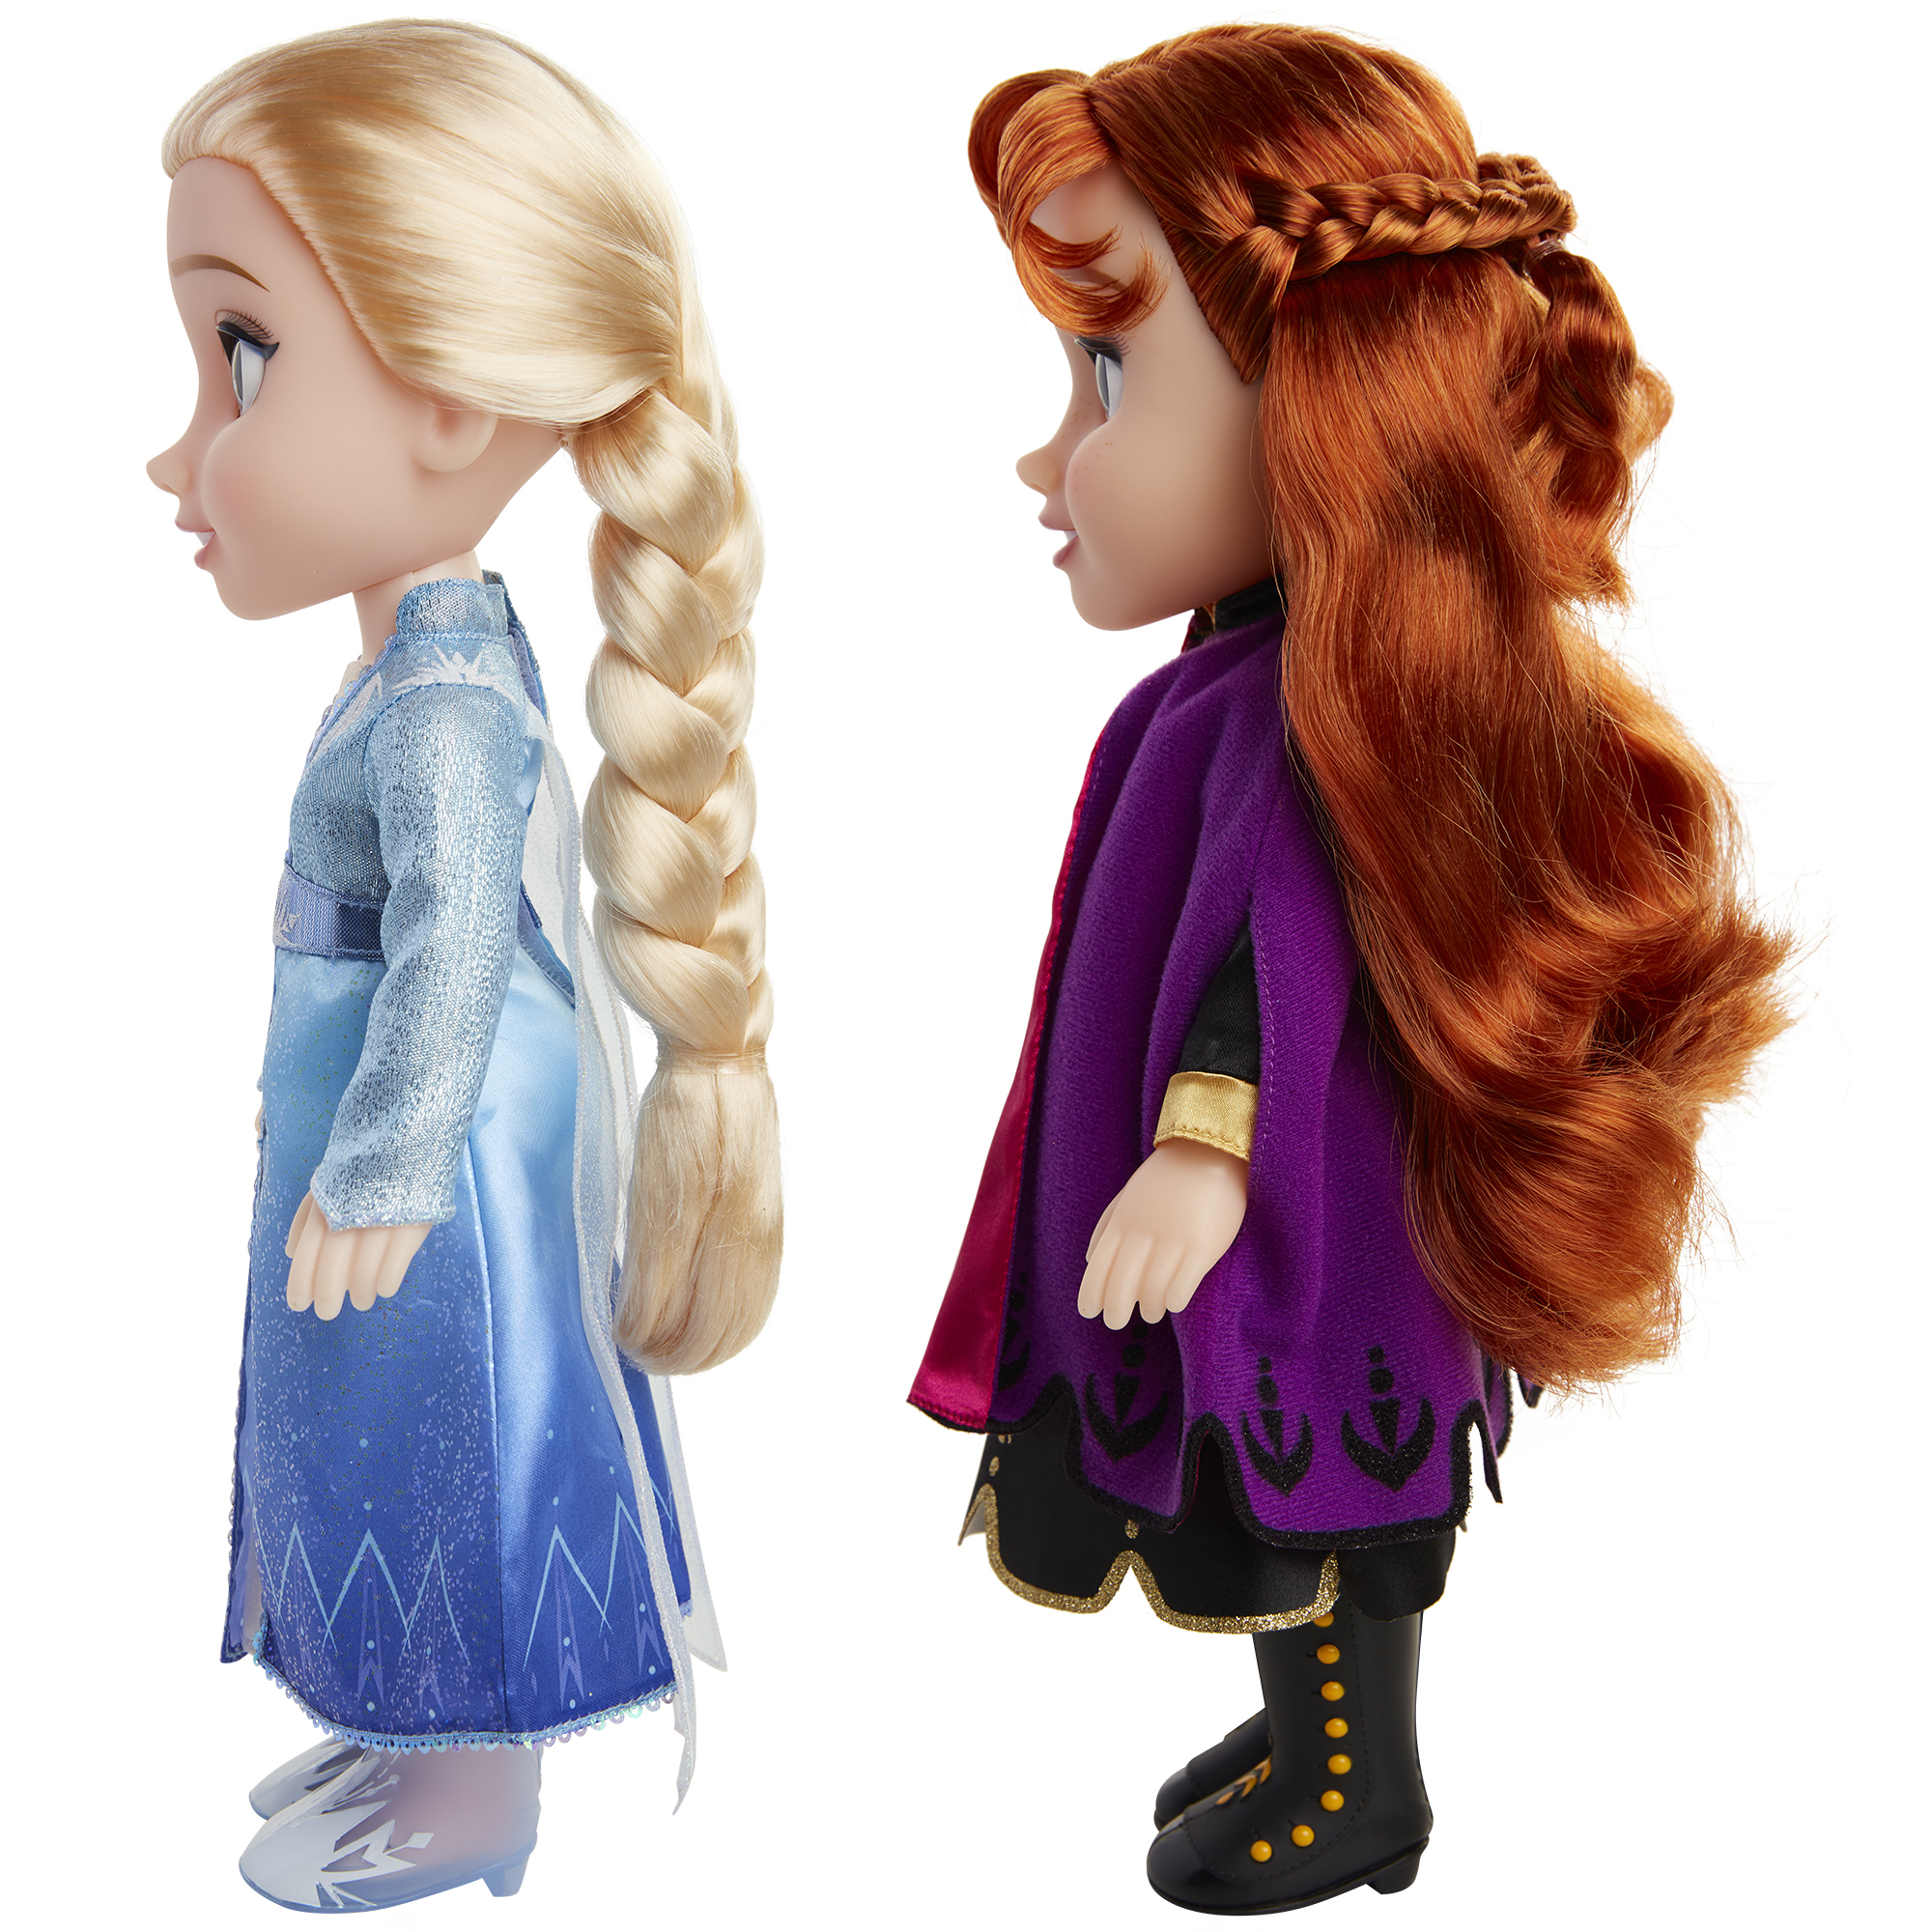 Disney Princess Anna and Elsa 14 Inch Singing Sisters Feature Fashion Doll 2 Pack - image 2 of 12